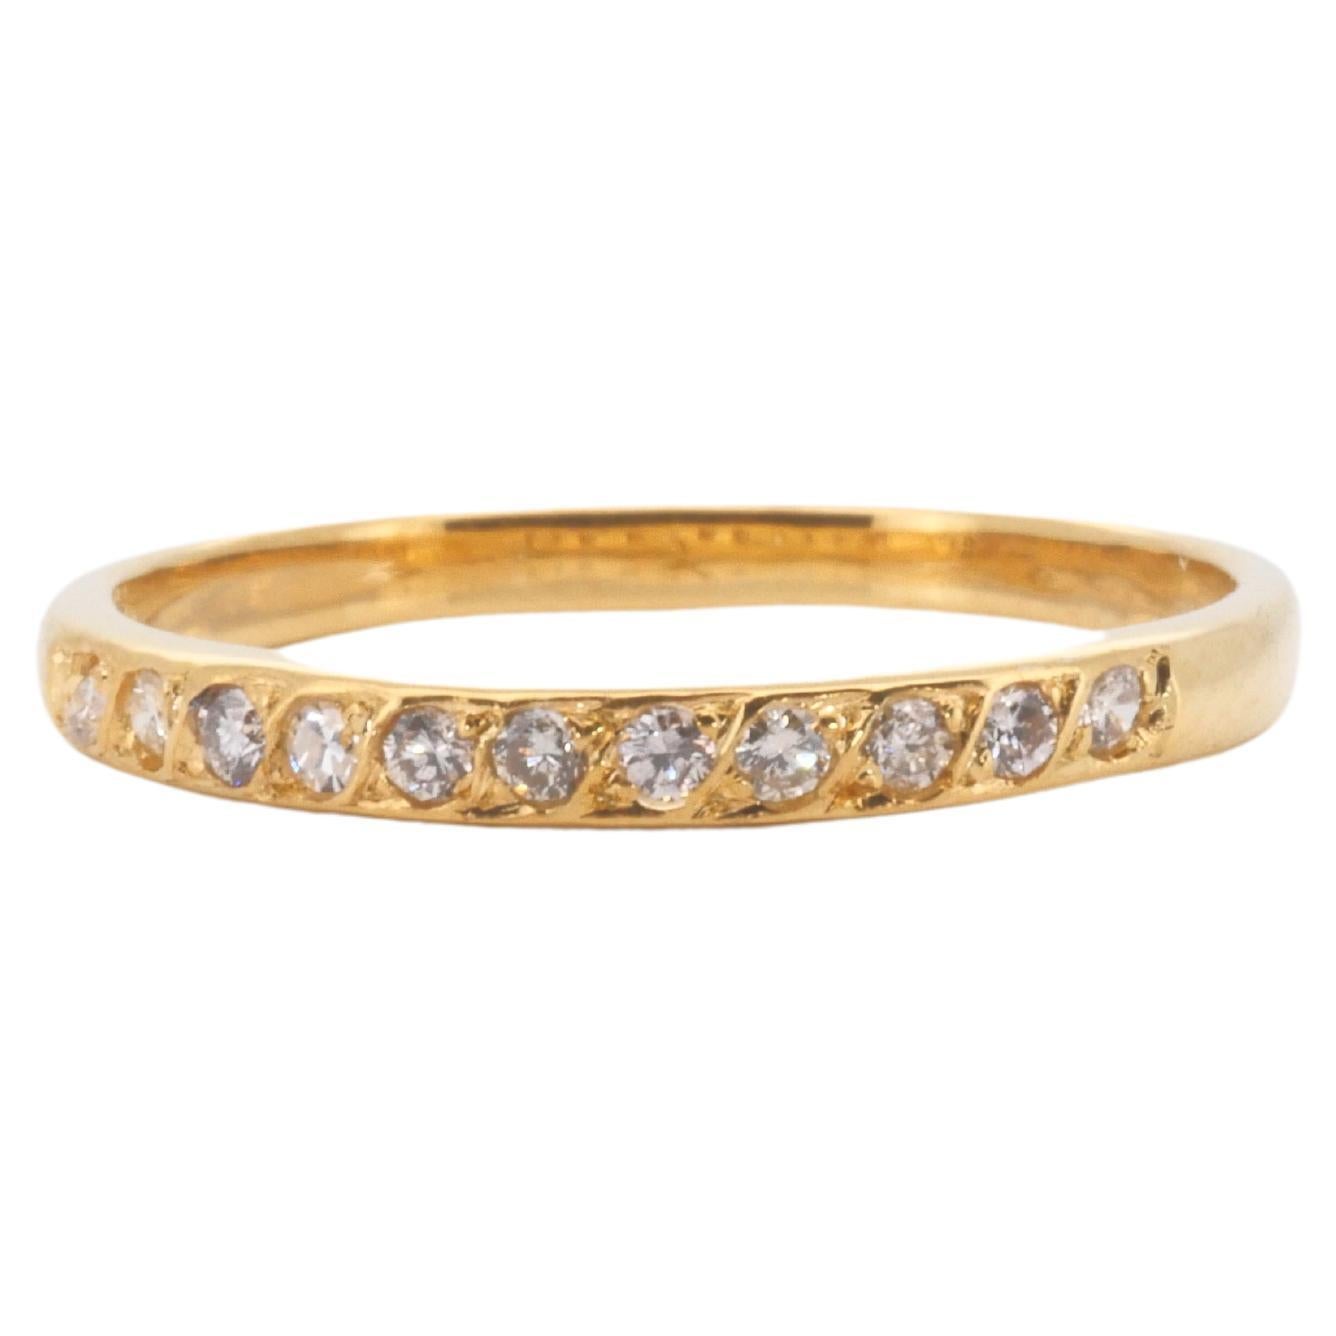 18k Yellow Gold Pave Thin Band Ring with 0.11 Carat of Natural Diamonds